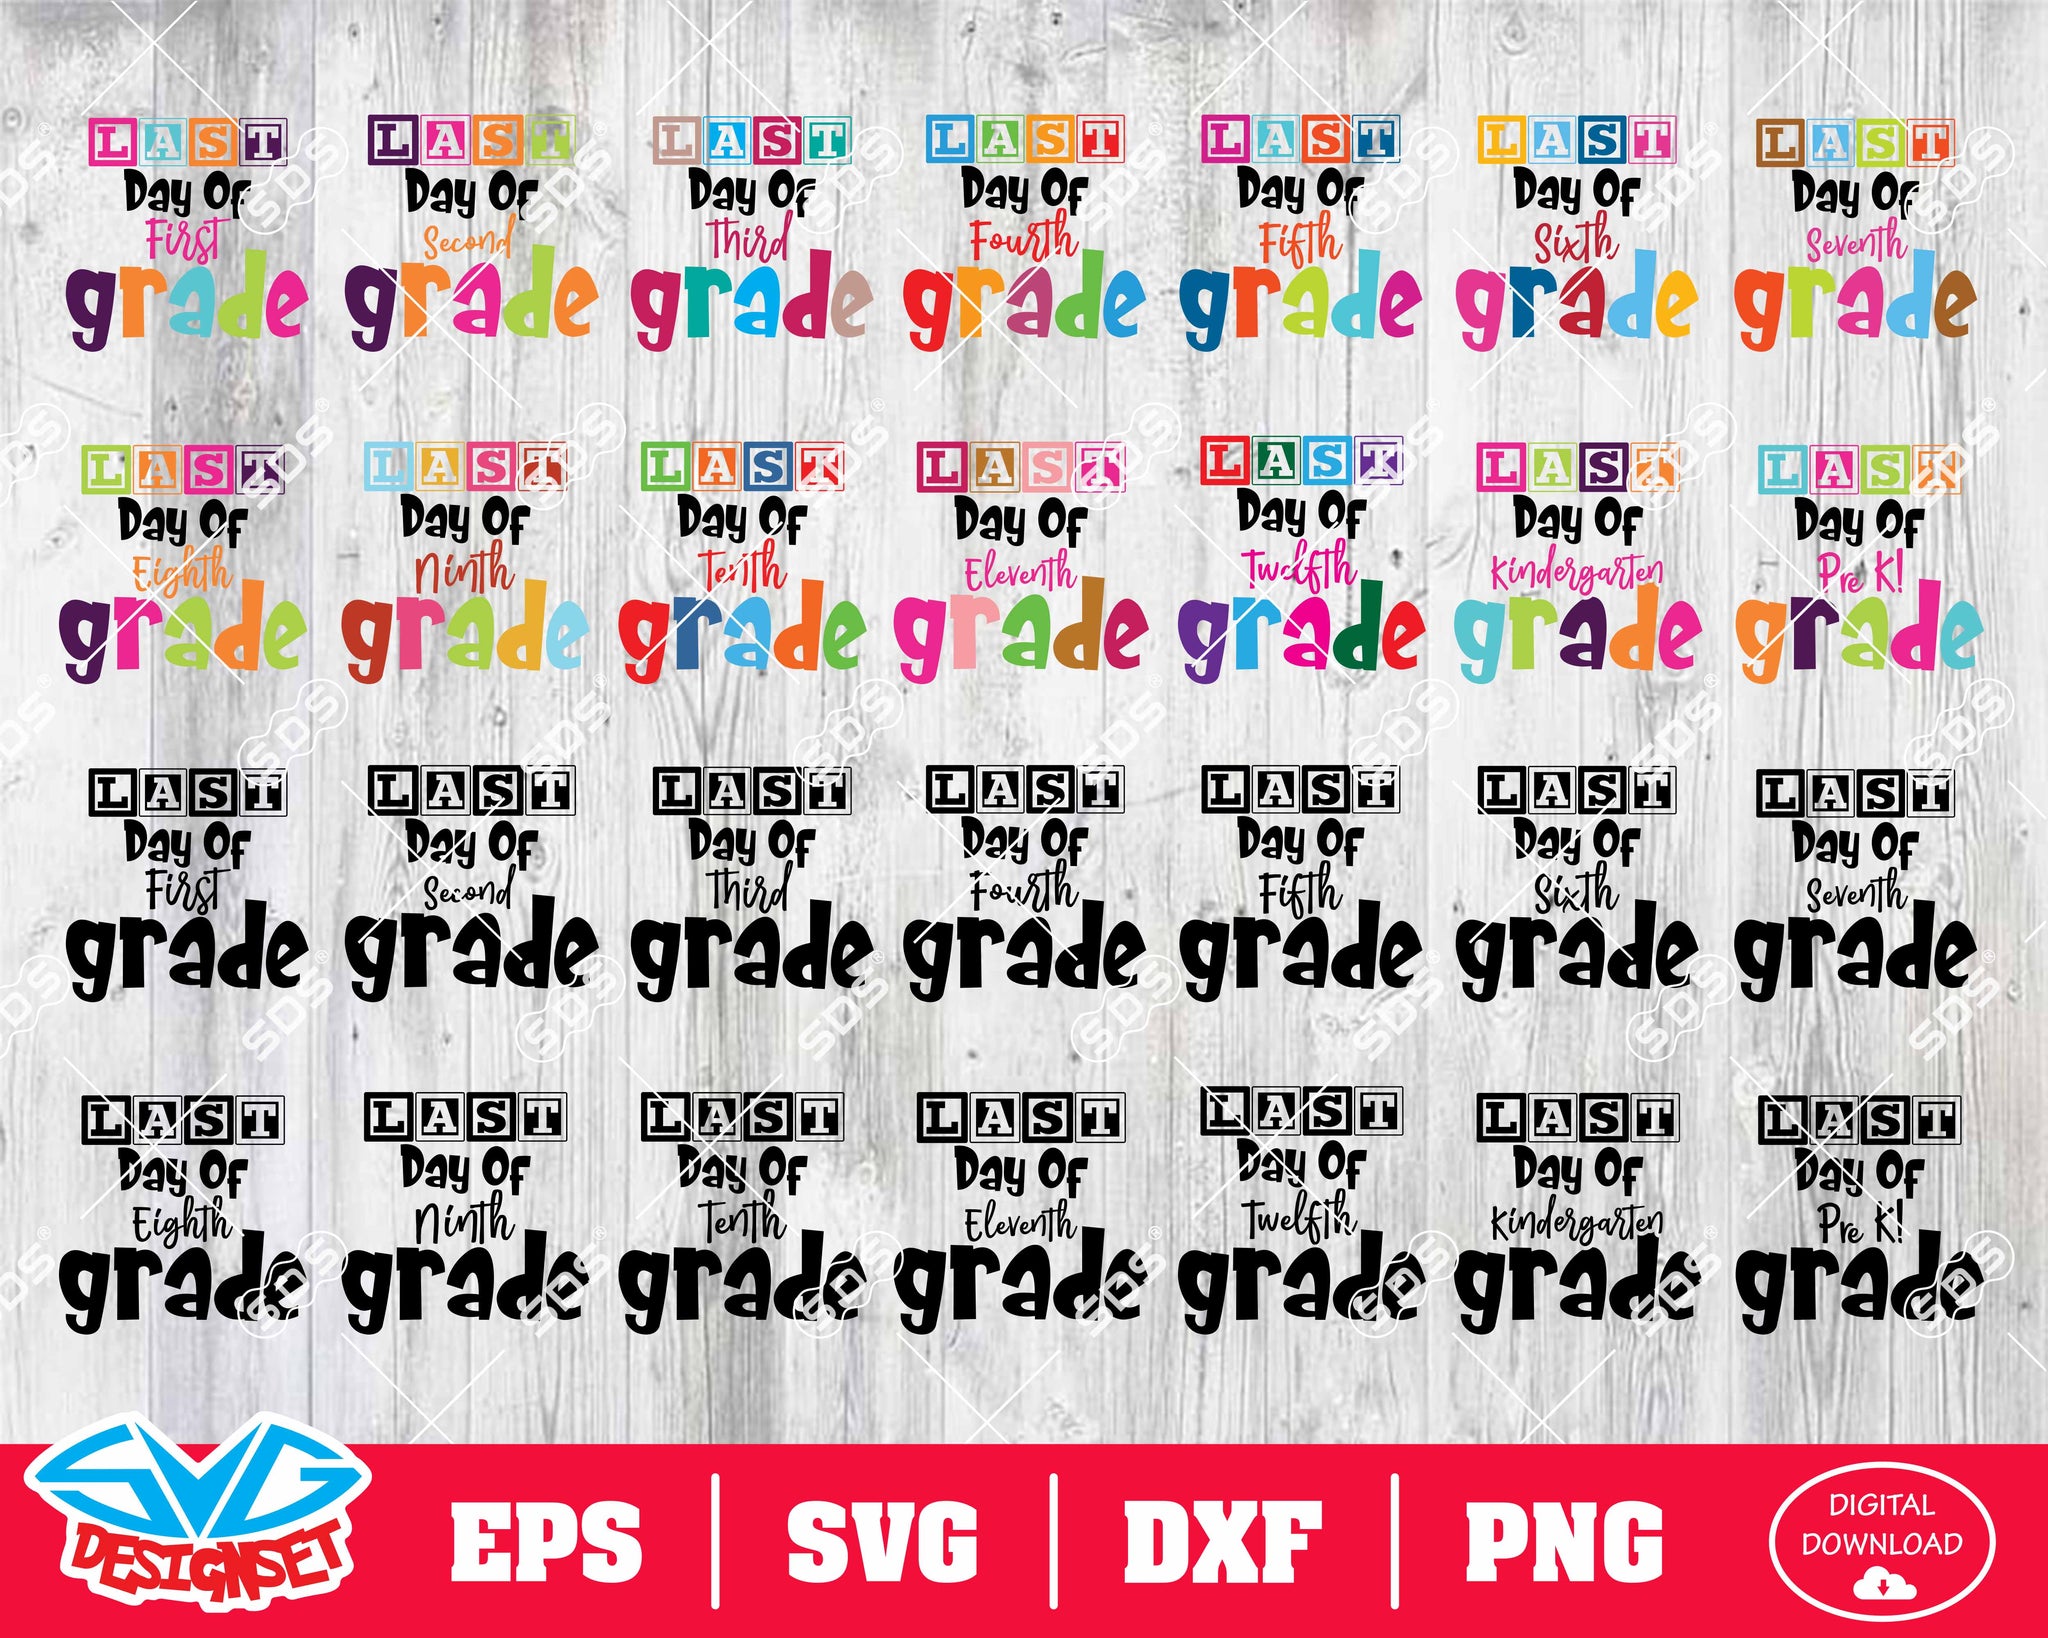 Back to School Svg, Dxf, Eps, Png, Clipart, Silhouette and Cutfiles #7 - SVGDesignSets